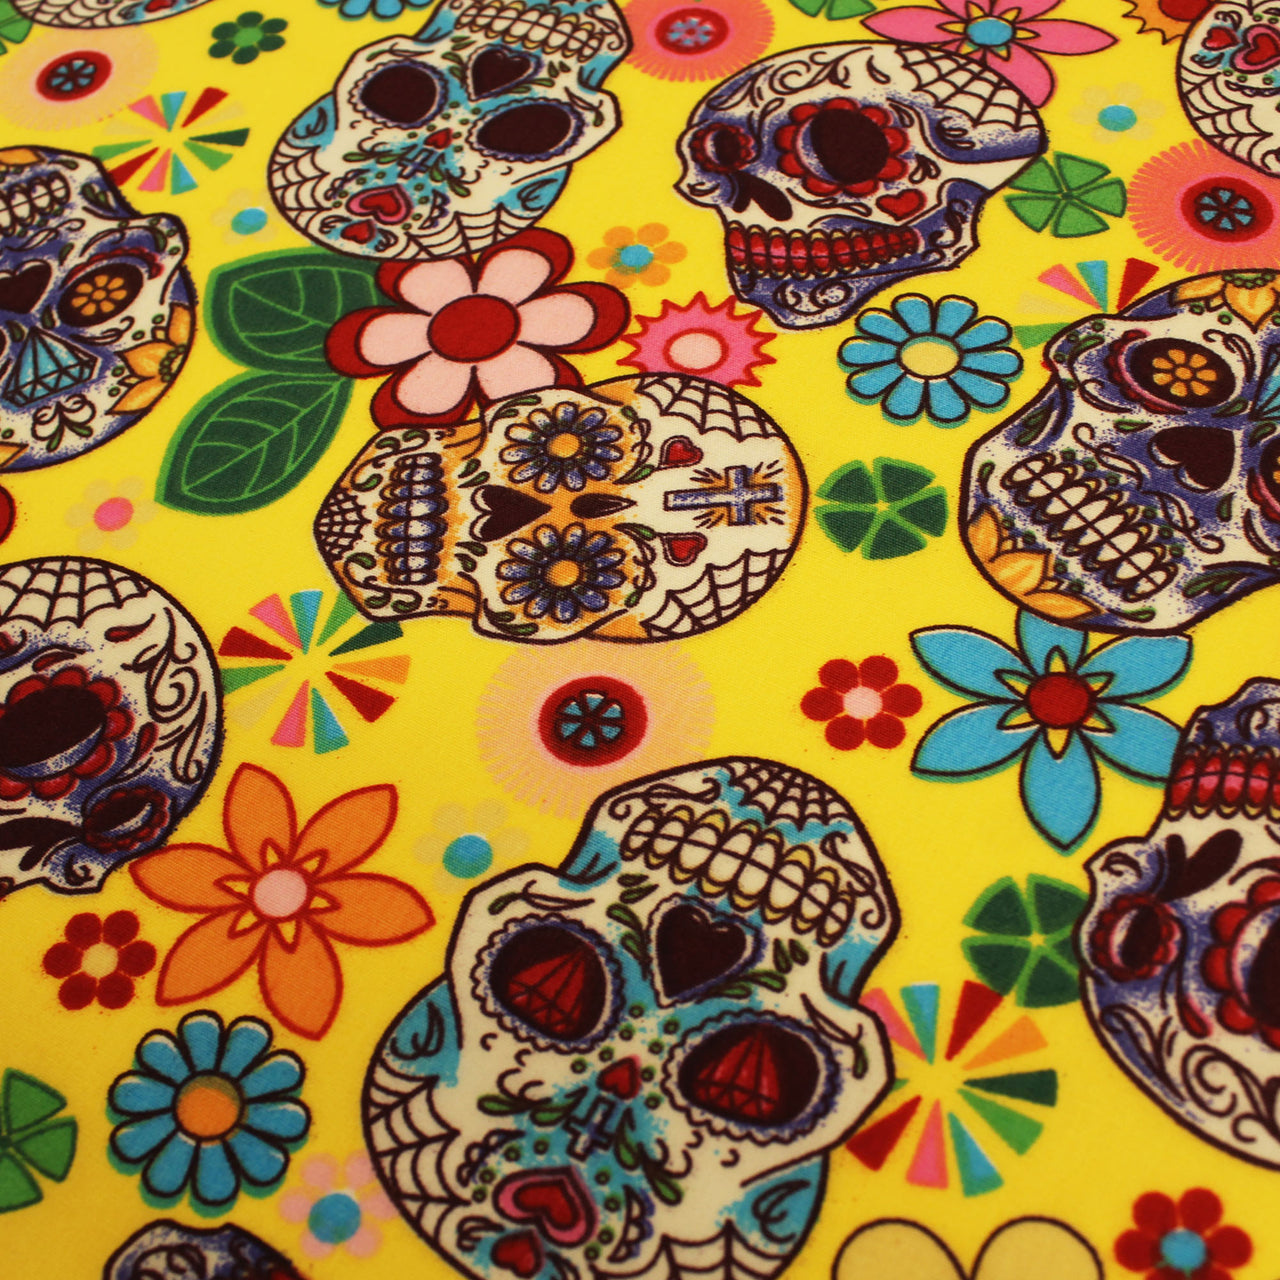 100% Cotton Poplin Fabric with Sugar Skulls - Mexican Day of the Dead - Halloween